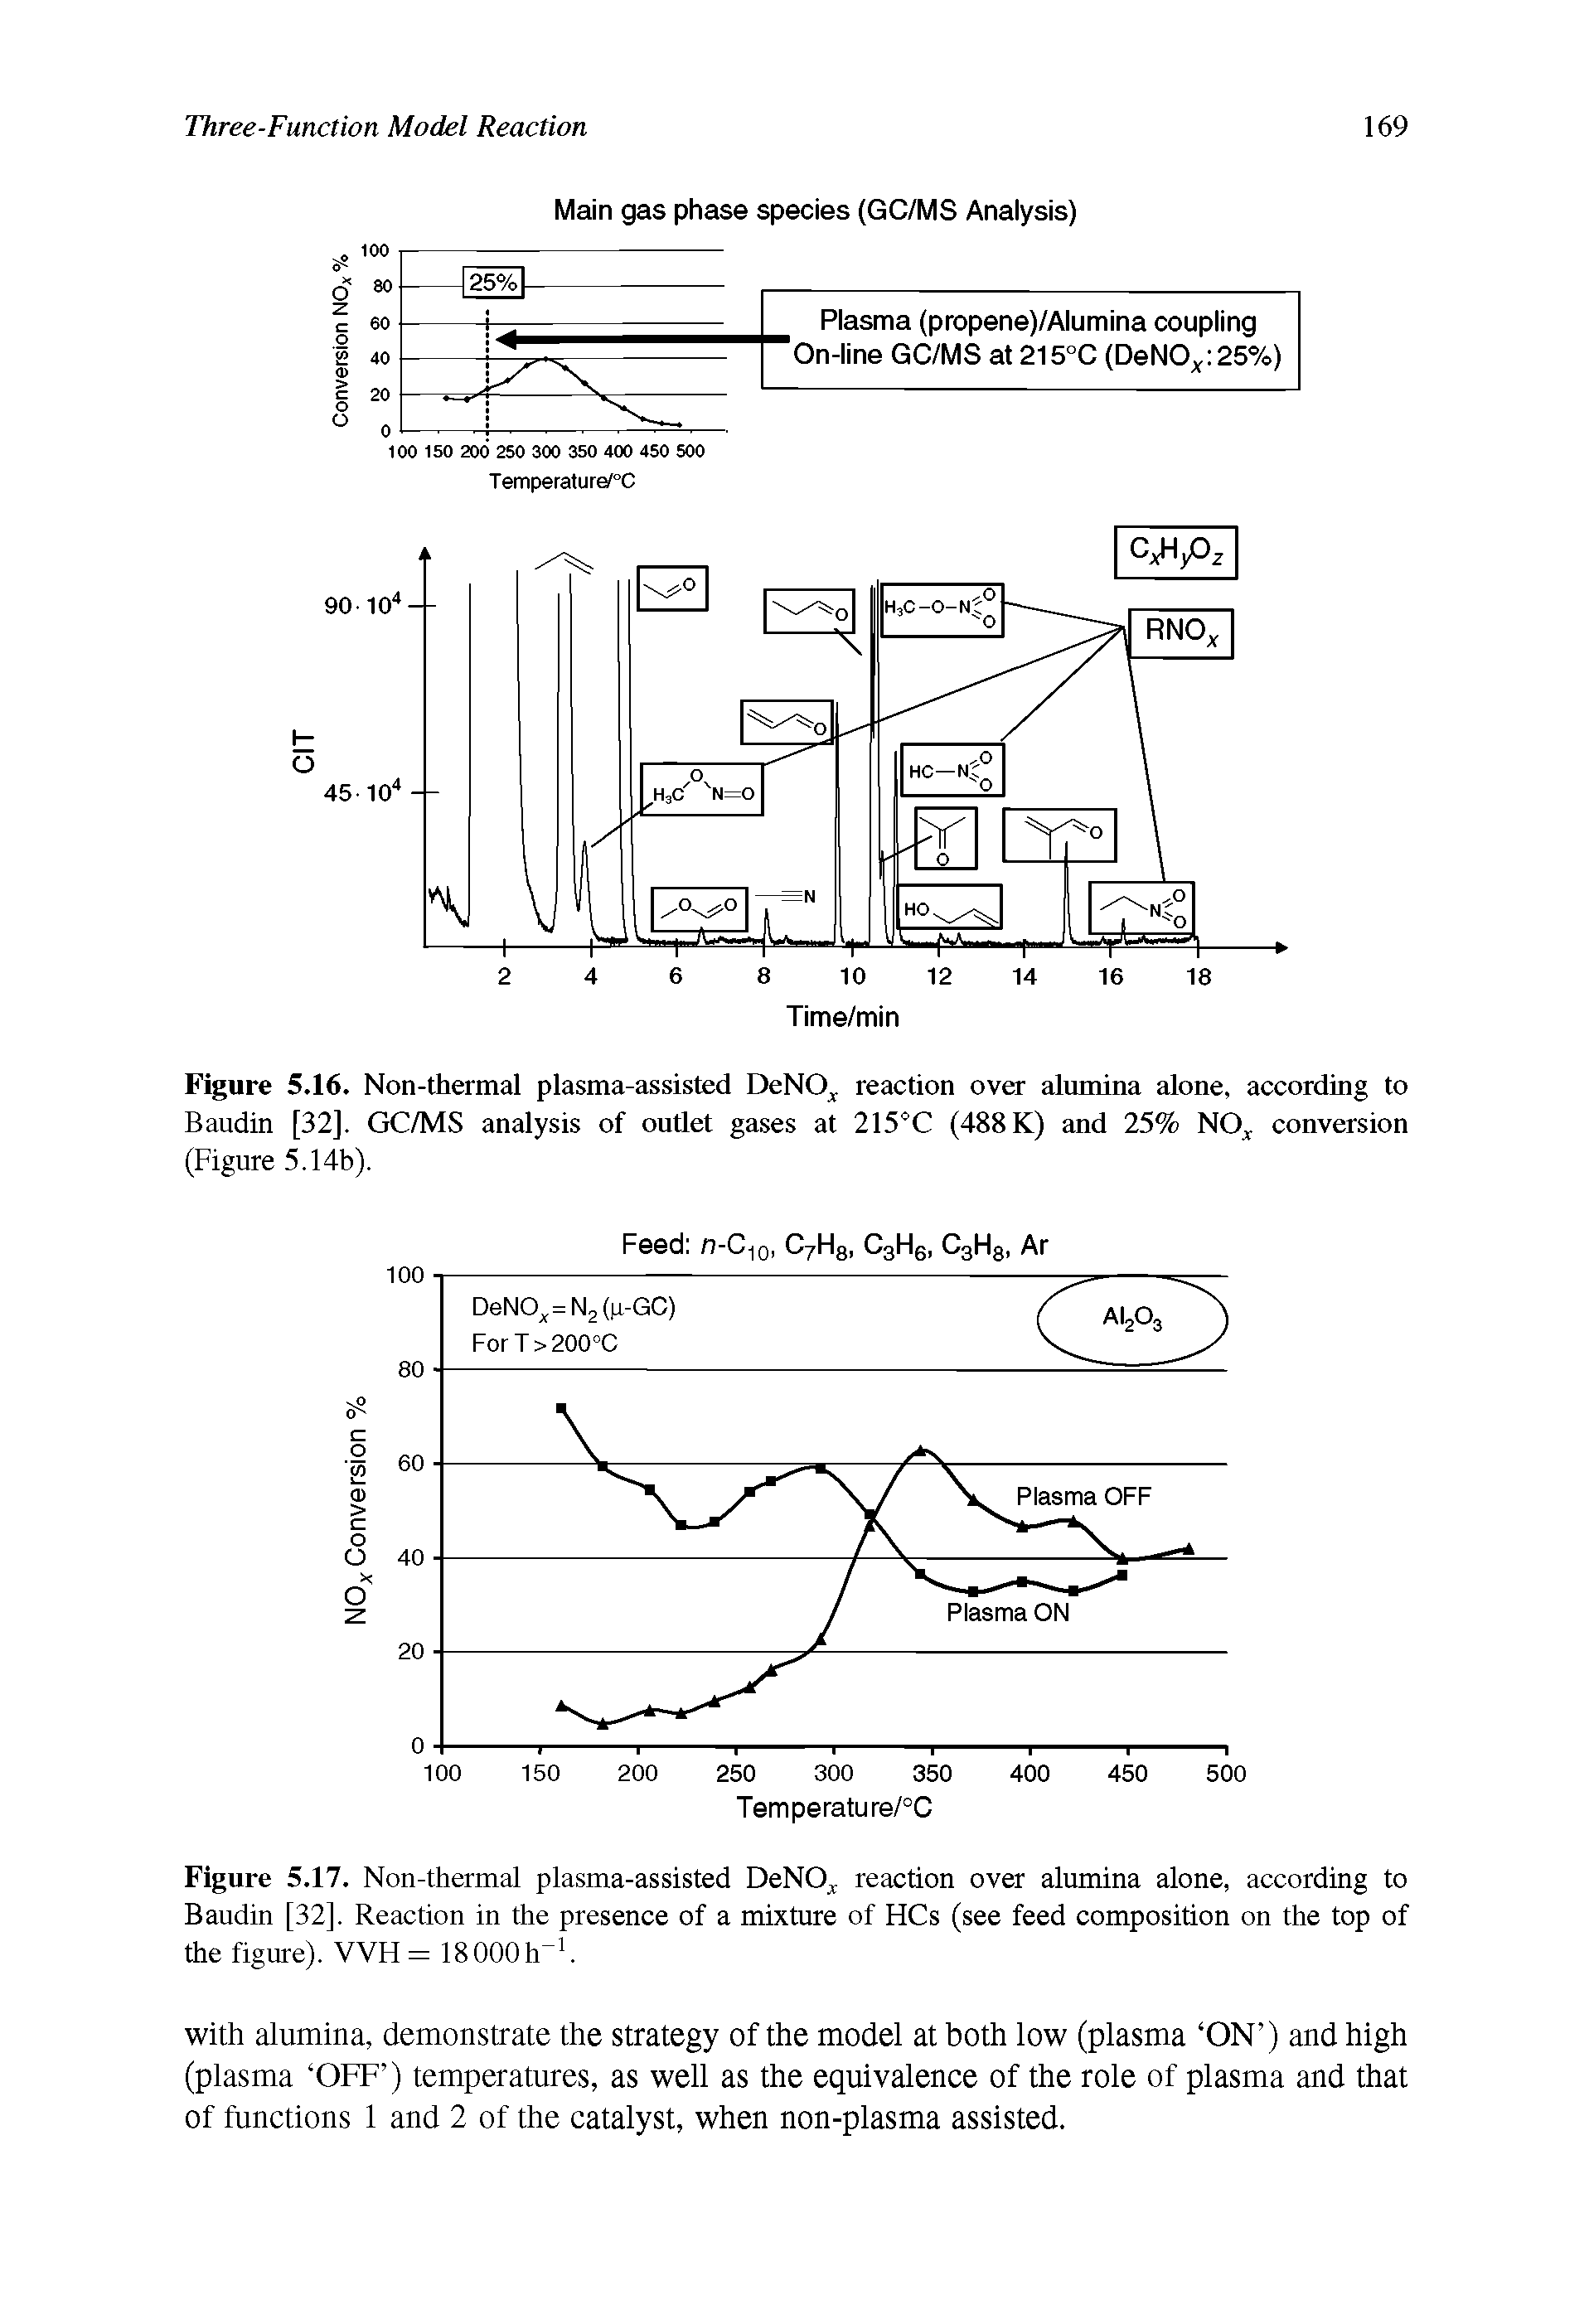 Figure 5.16. Non-thermal plasma-assisted l)cNOx reaction over alumina alone, according to Baudin [32]. GC/MS analysis of outlet gases at 215°C (488 K) and 25% NOx conversion (Figure 5.14b).